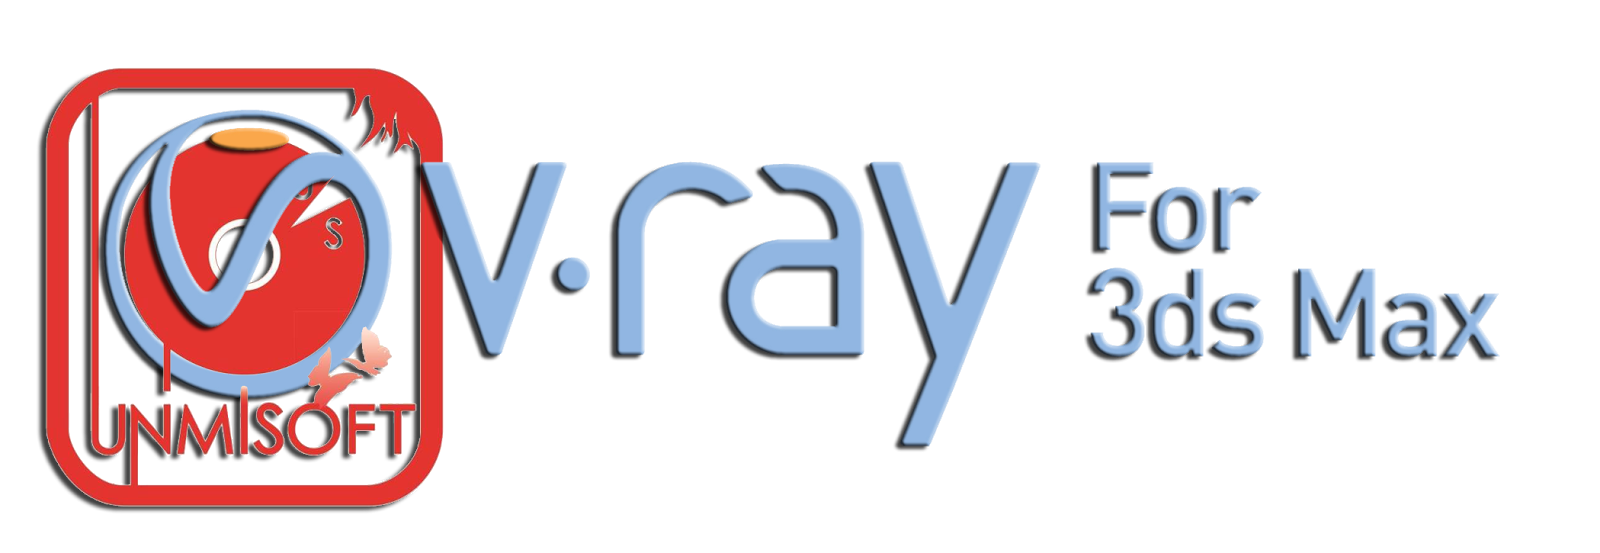 download vray for 3ds max free